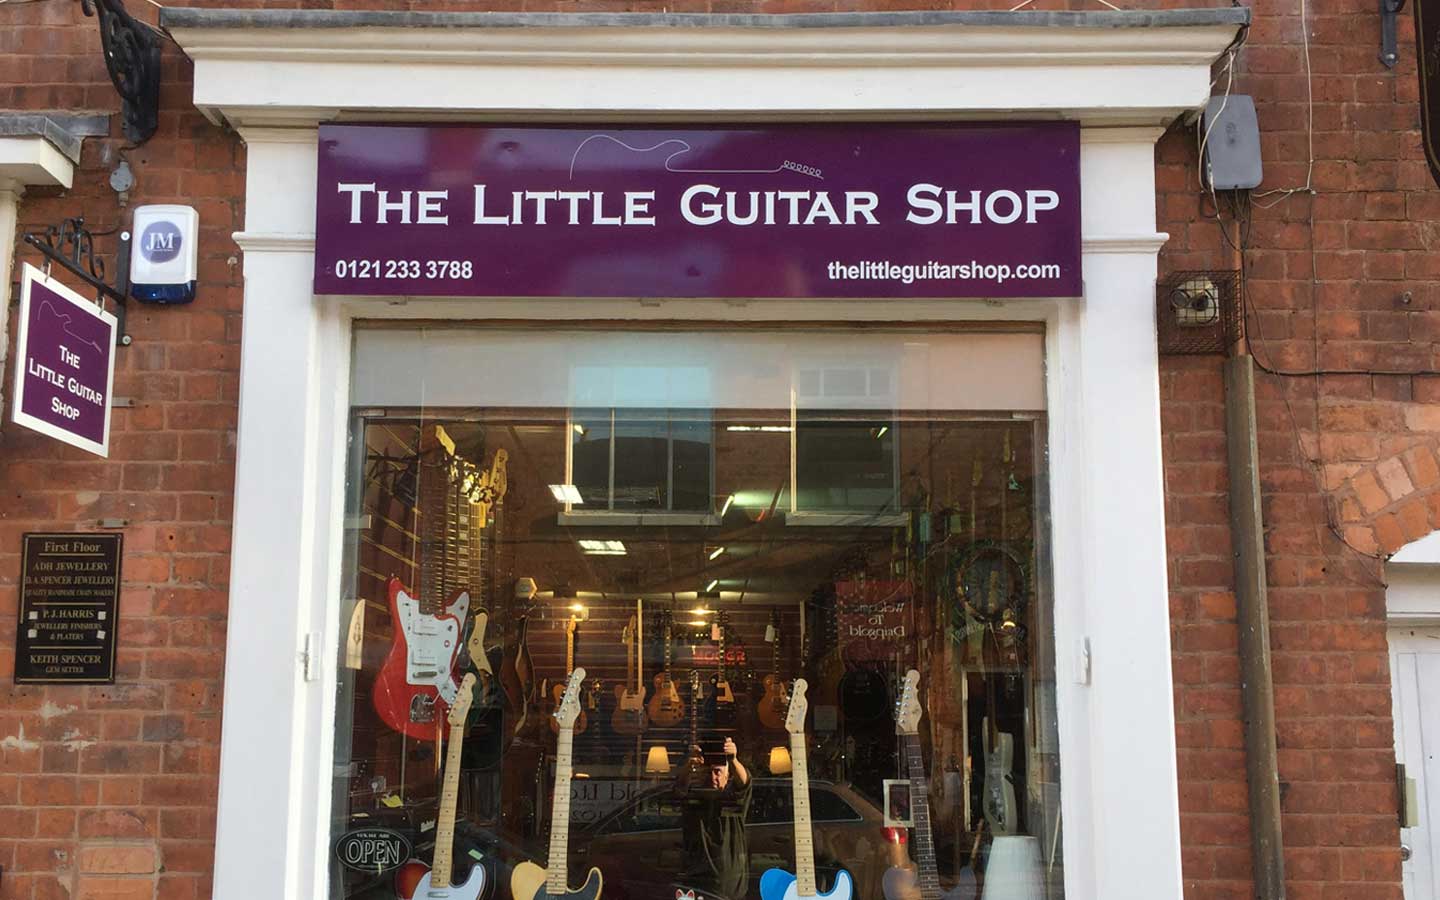 No Guitar Need Gently Weep This Little Guitar Shop is just Aladdin's cave great!